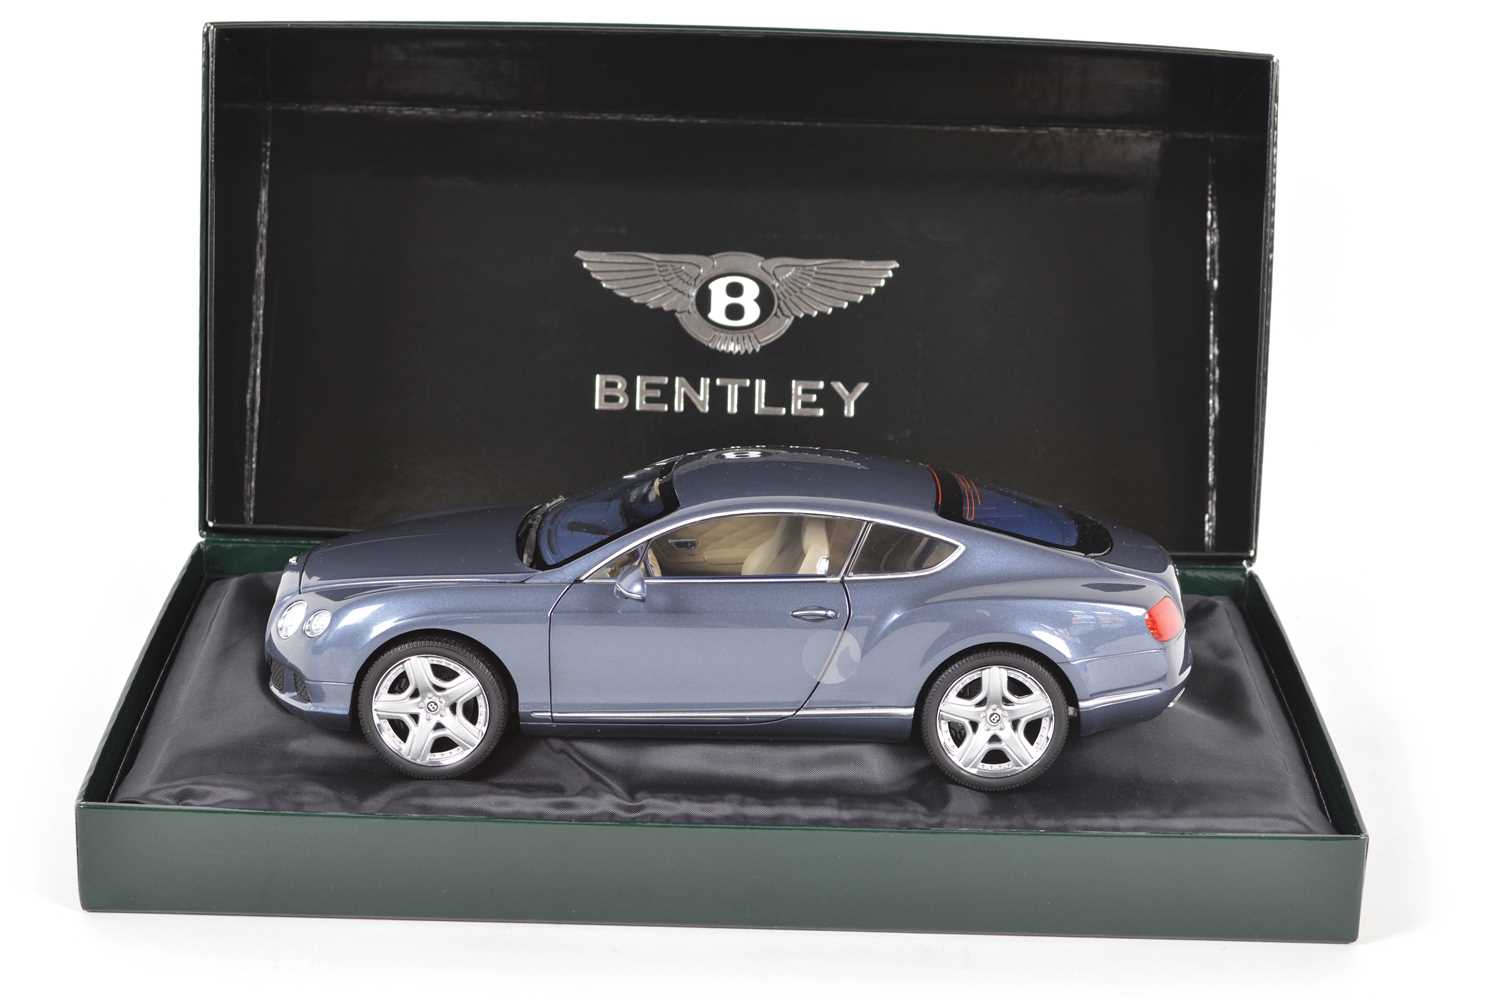 Lot 41 - Minichamps 1:18 scale Bentley Continental GT 2011 Thunder model